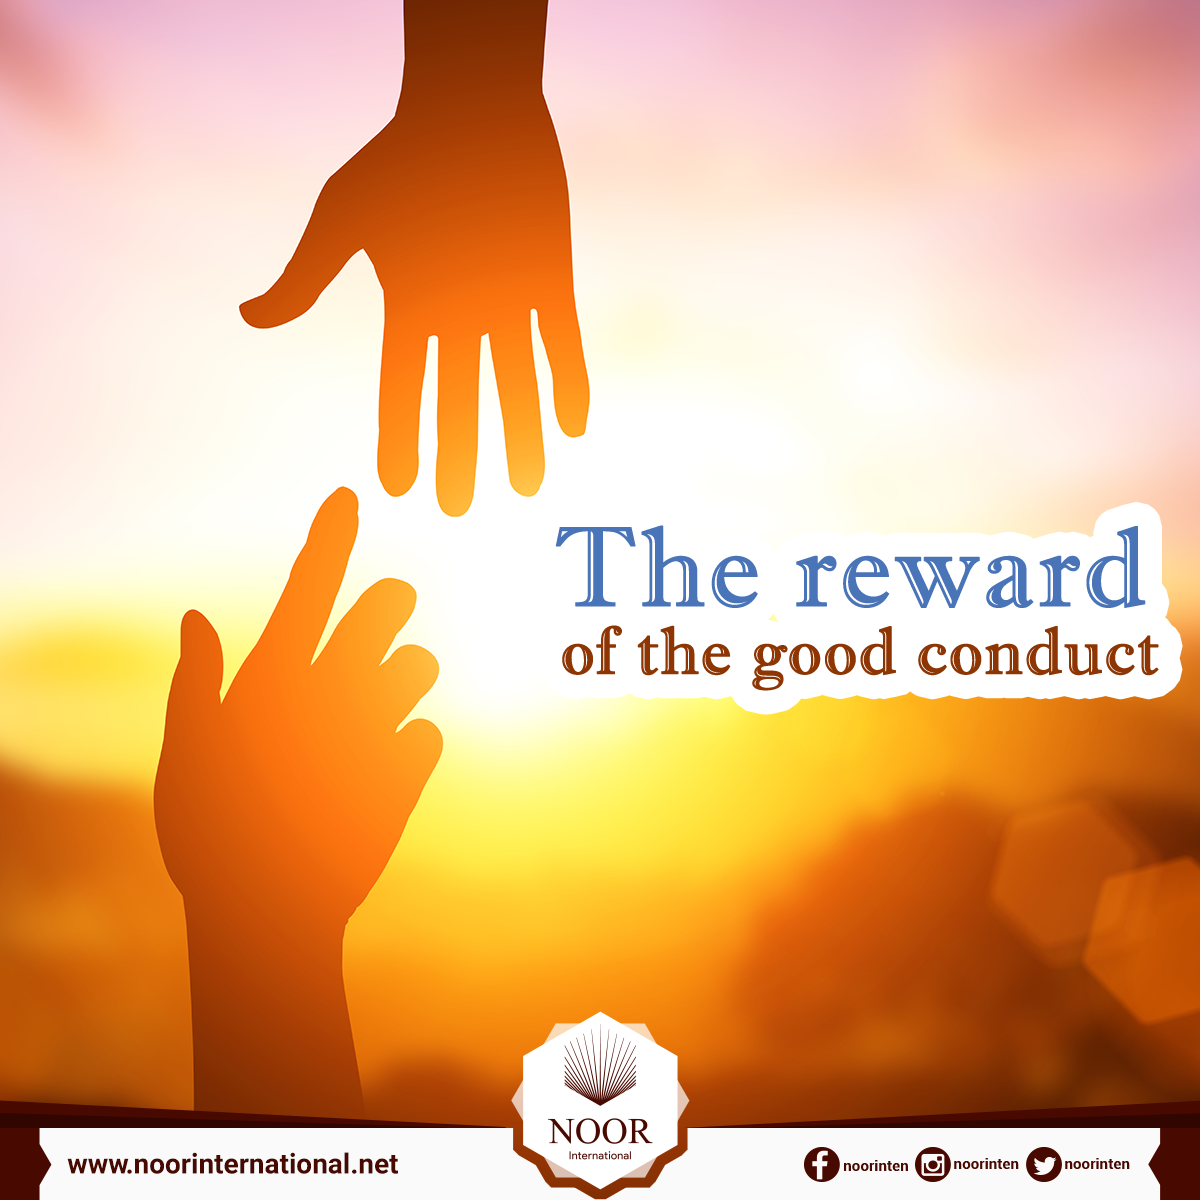 The reward of the good conduct